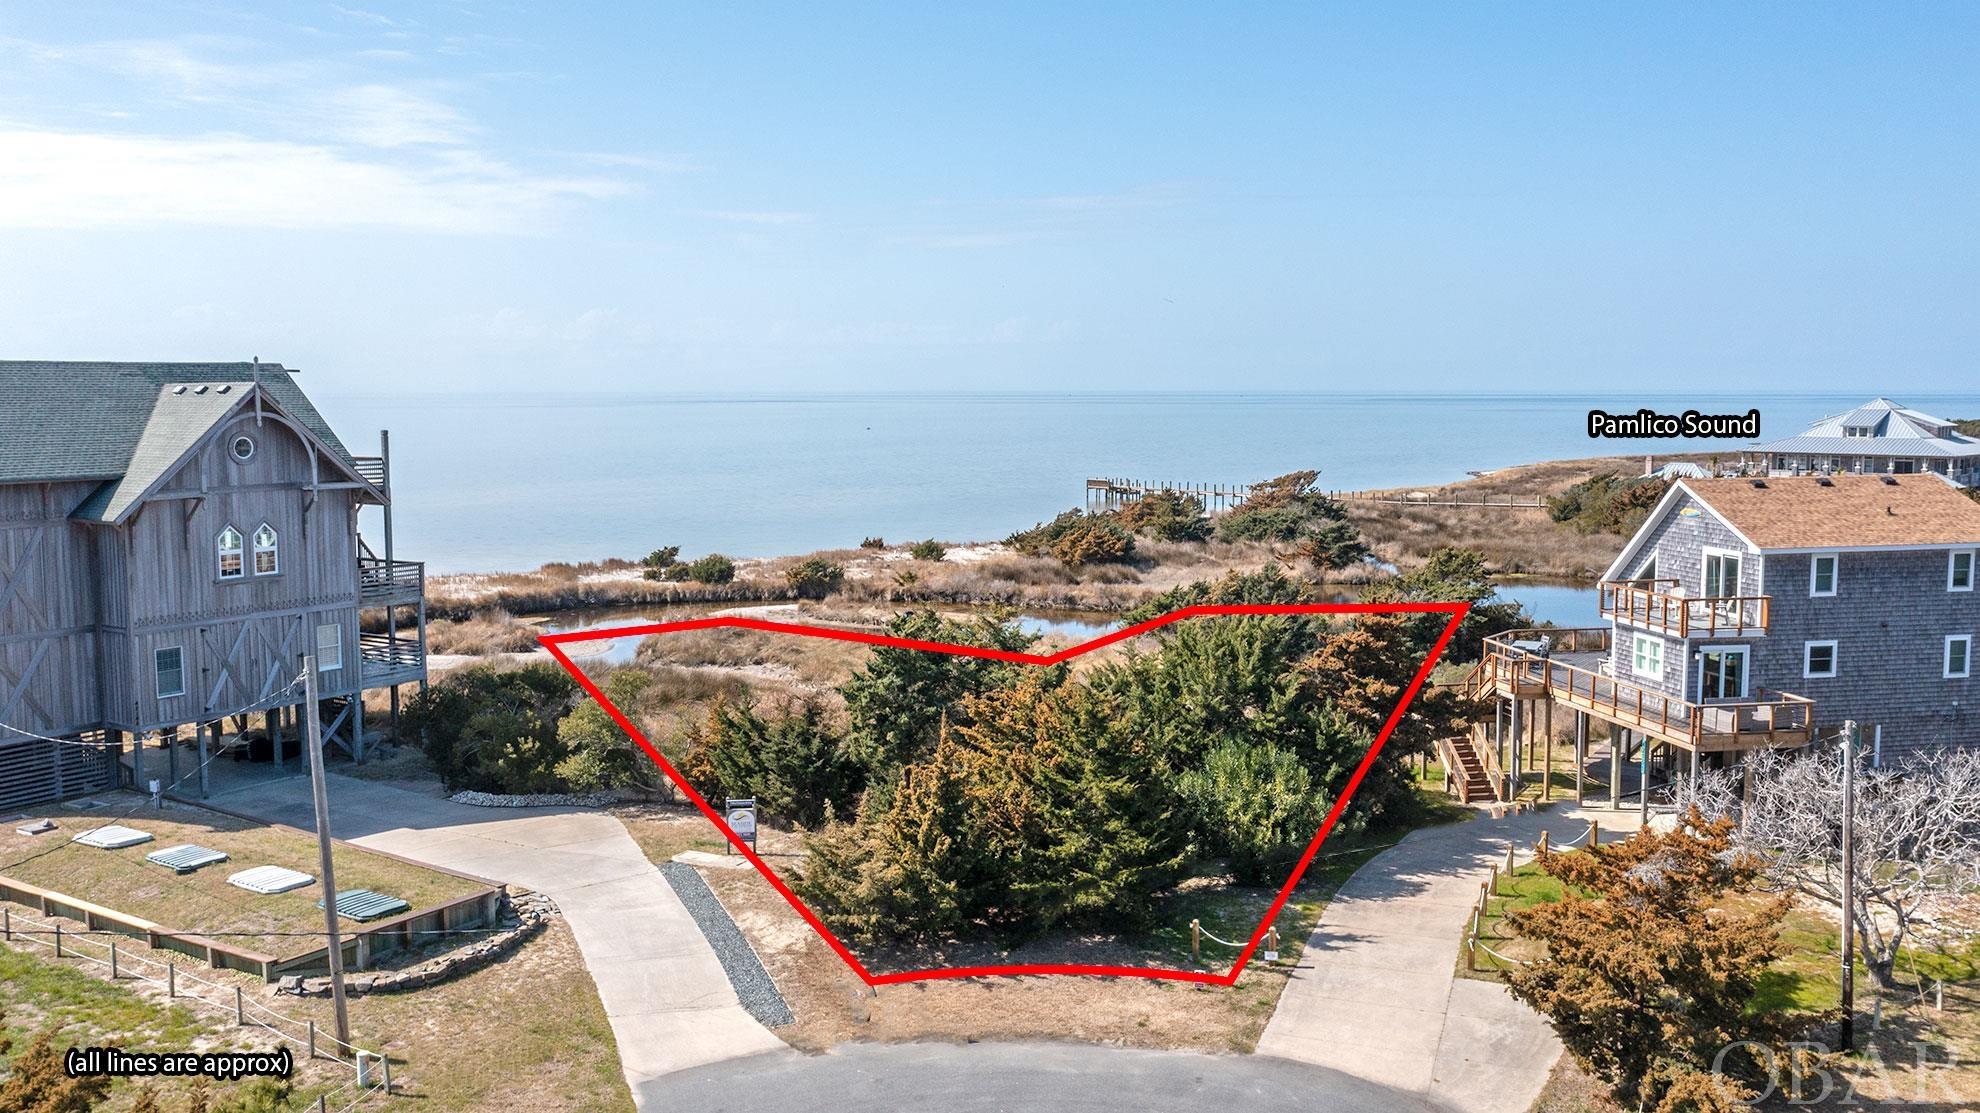 Nice sized basically sound-front lot with canal frontage as well. Almost directly on the white sand beaches of the sound with amazing sunset views. This lot sits on the end of the street so there will be little to no traffic. The canal on the back side of the lot connects to the Pamlico Sound and gives vast amounts of privacy and offers westward views towards the Sunset year round.  Almost bordering the state park reserve to the south by two lots this waterfront lot offers serenity and privacy. Only a two minute drive to the beach parking lot access and 4x4 ramp to the beach for those four wheel drive autos.  Come design your property and home the way you desire.